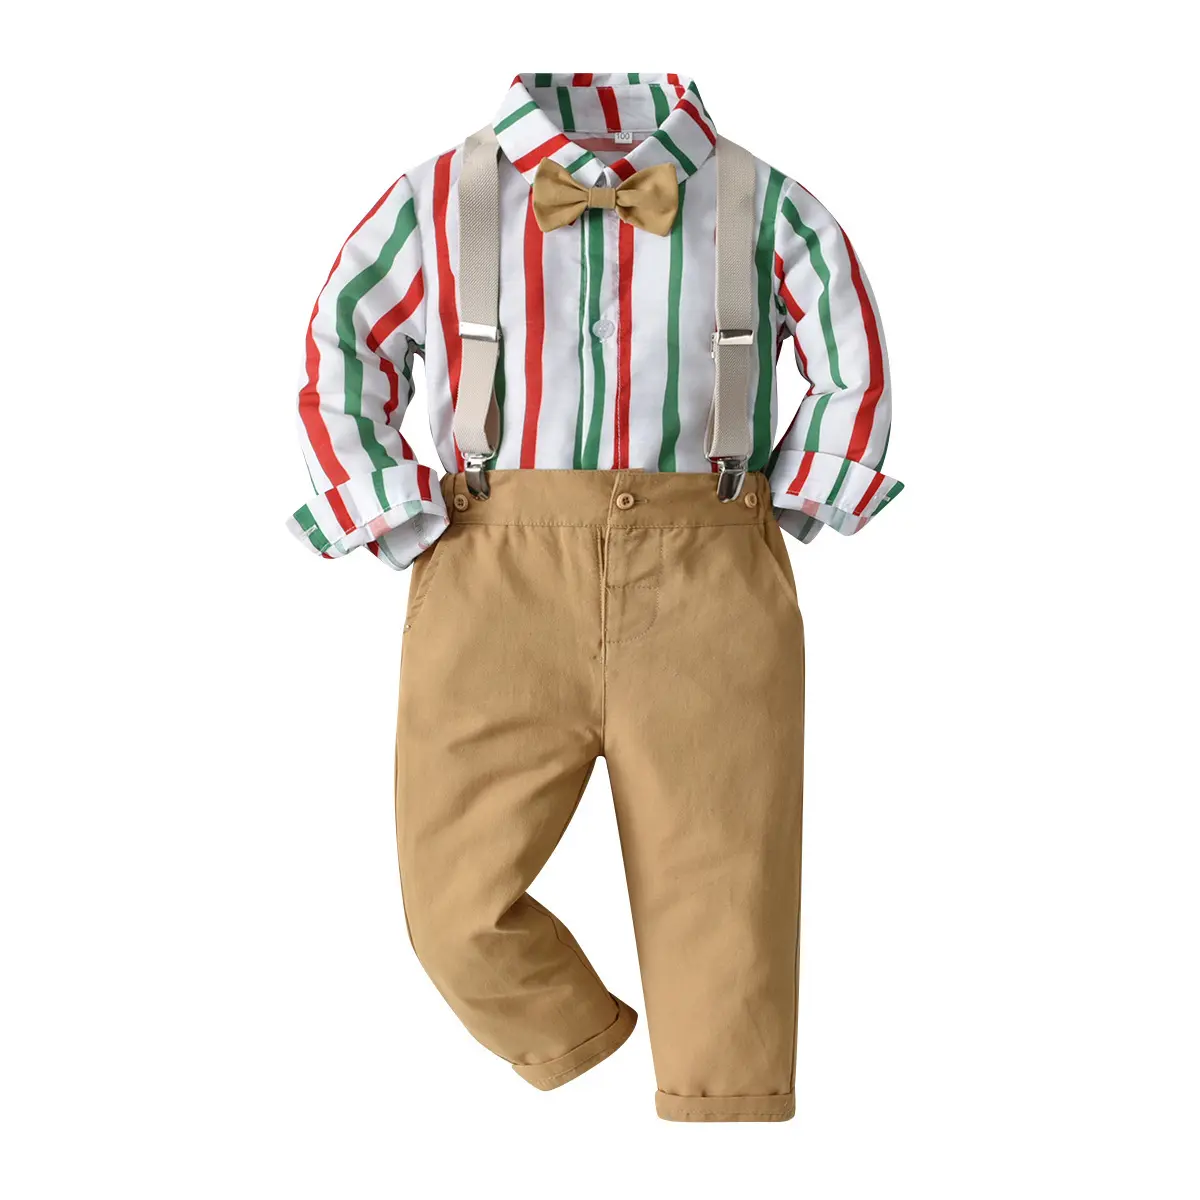 Hot Sale Factory Children Shirts Pants Suits Toddlers Suits Kids Clothing Online Baby Boys Outfits Cute Newborn Baby Clothes